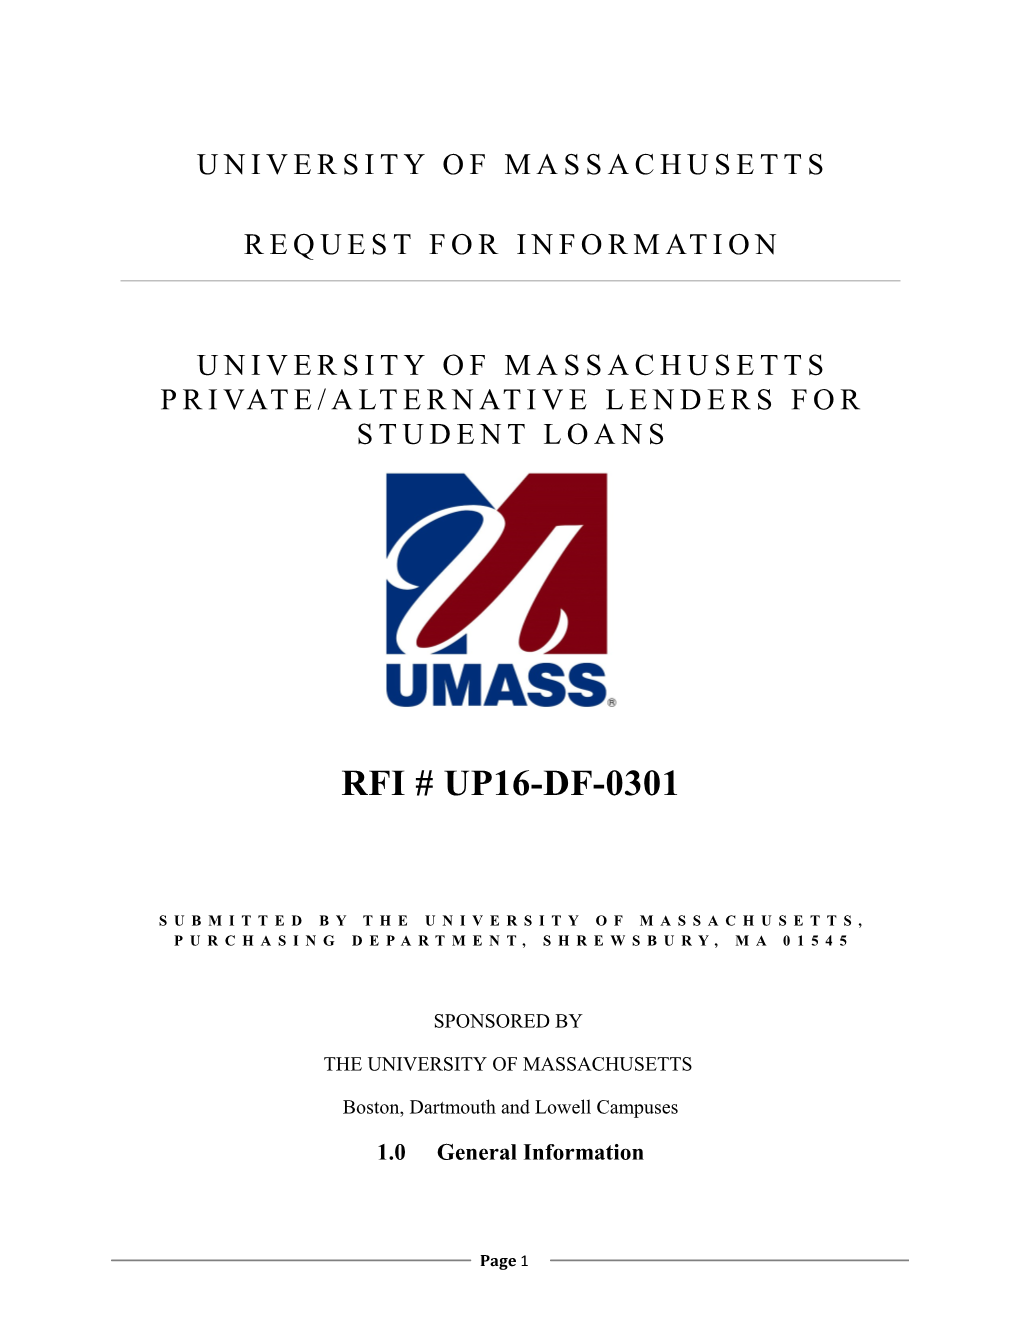 Submitted by the University of Massachusetts, Purchasing Department, Shrewsbury, Ma 01545